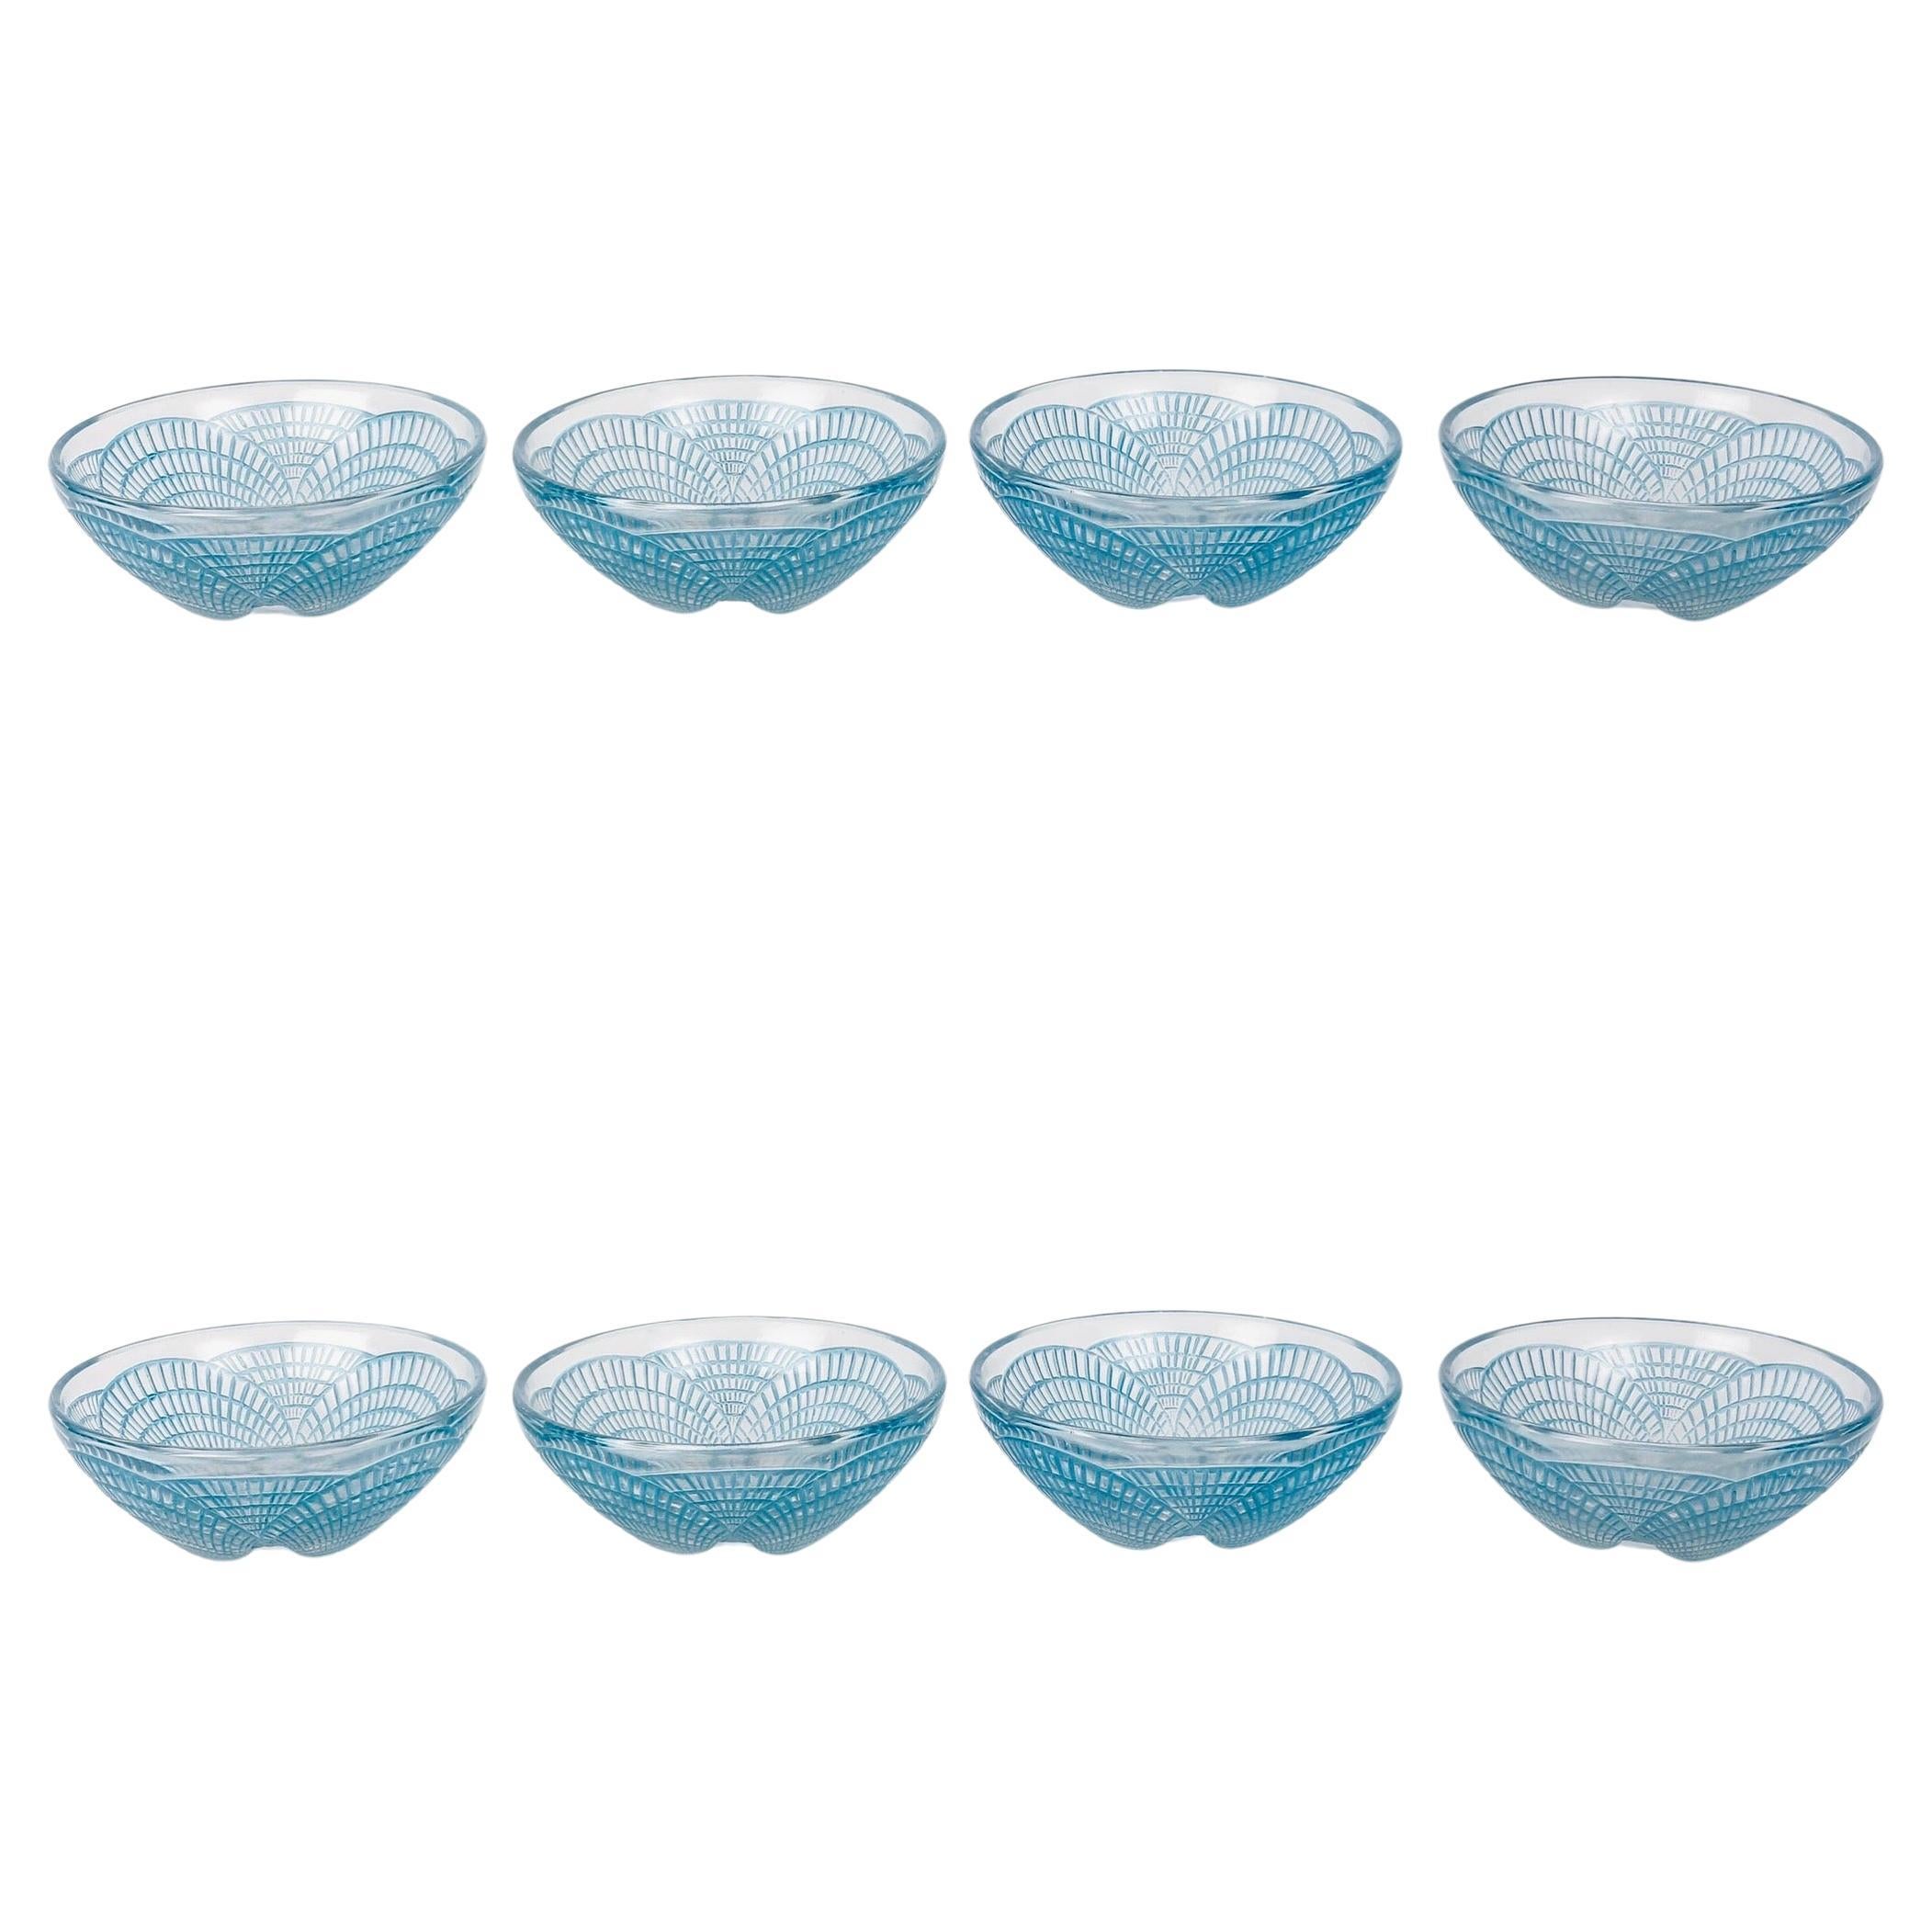 1924 René Lalique - Tablewares Bowls Coquilles Shells Glass With Blue Patina 